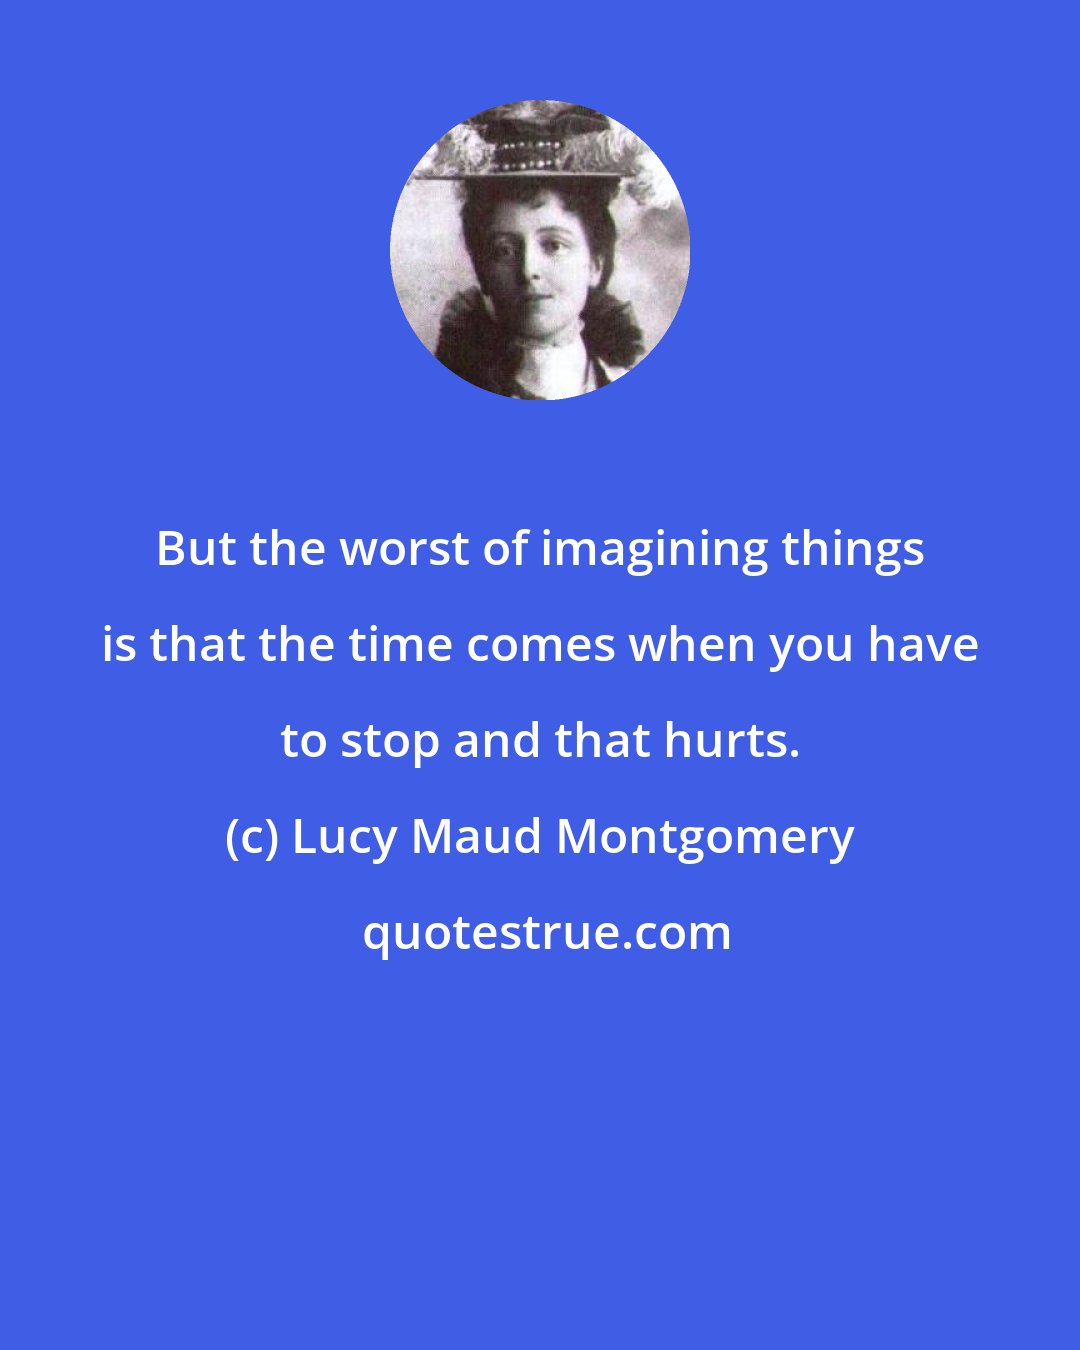 Lucy Maud Montgomery: But the worst of imagining things is that the time comes when you have to stop and that hurts.